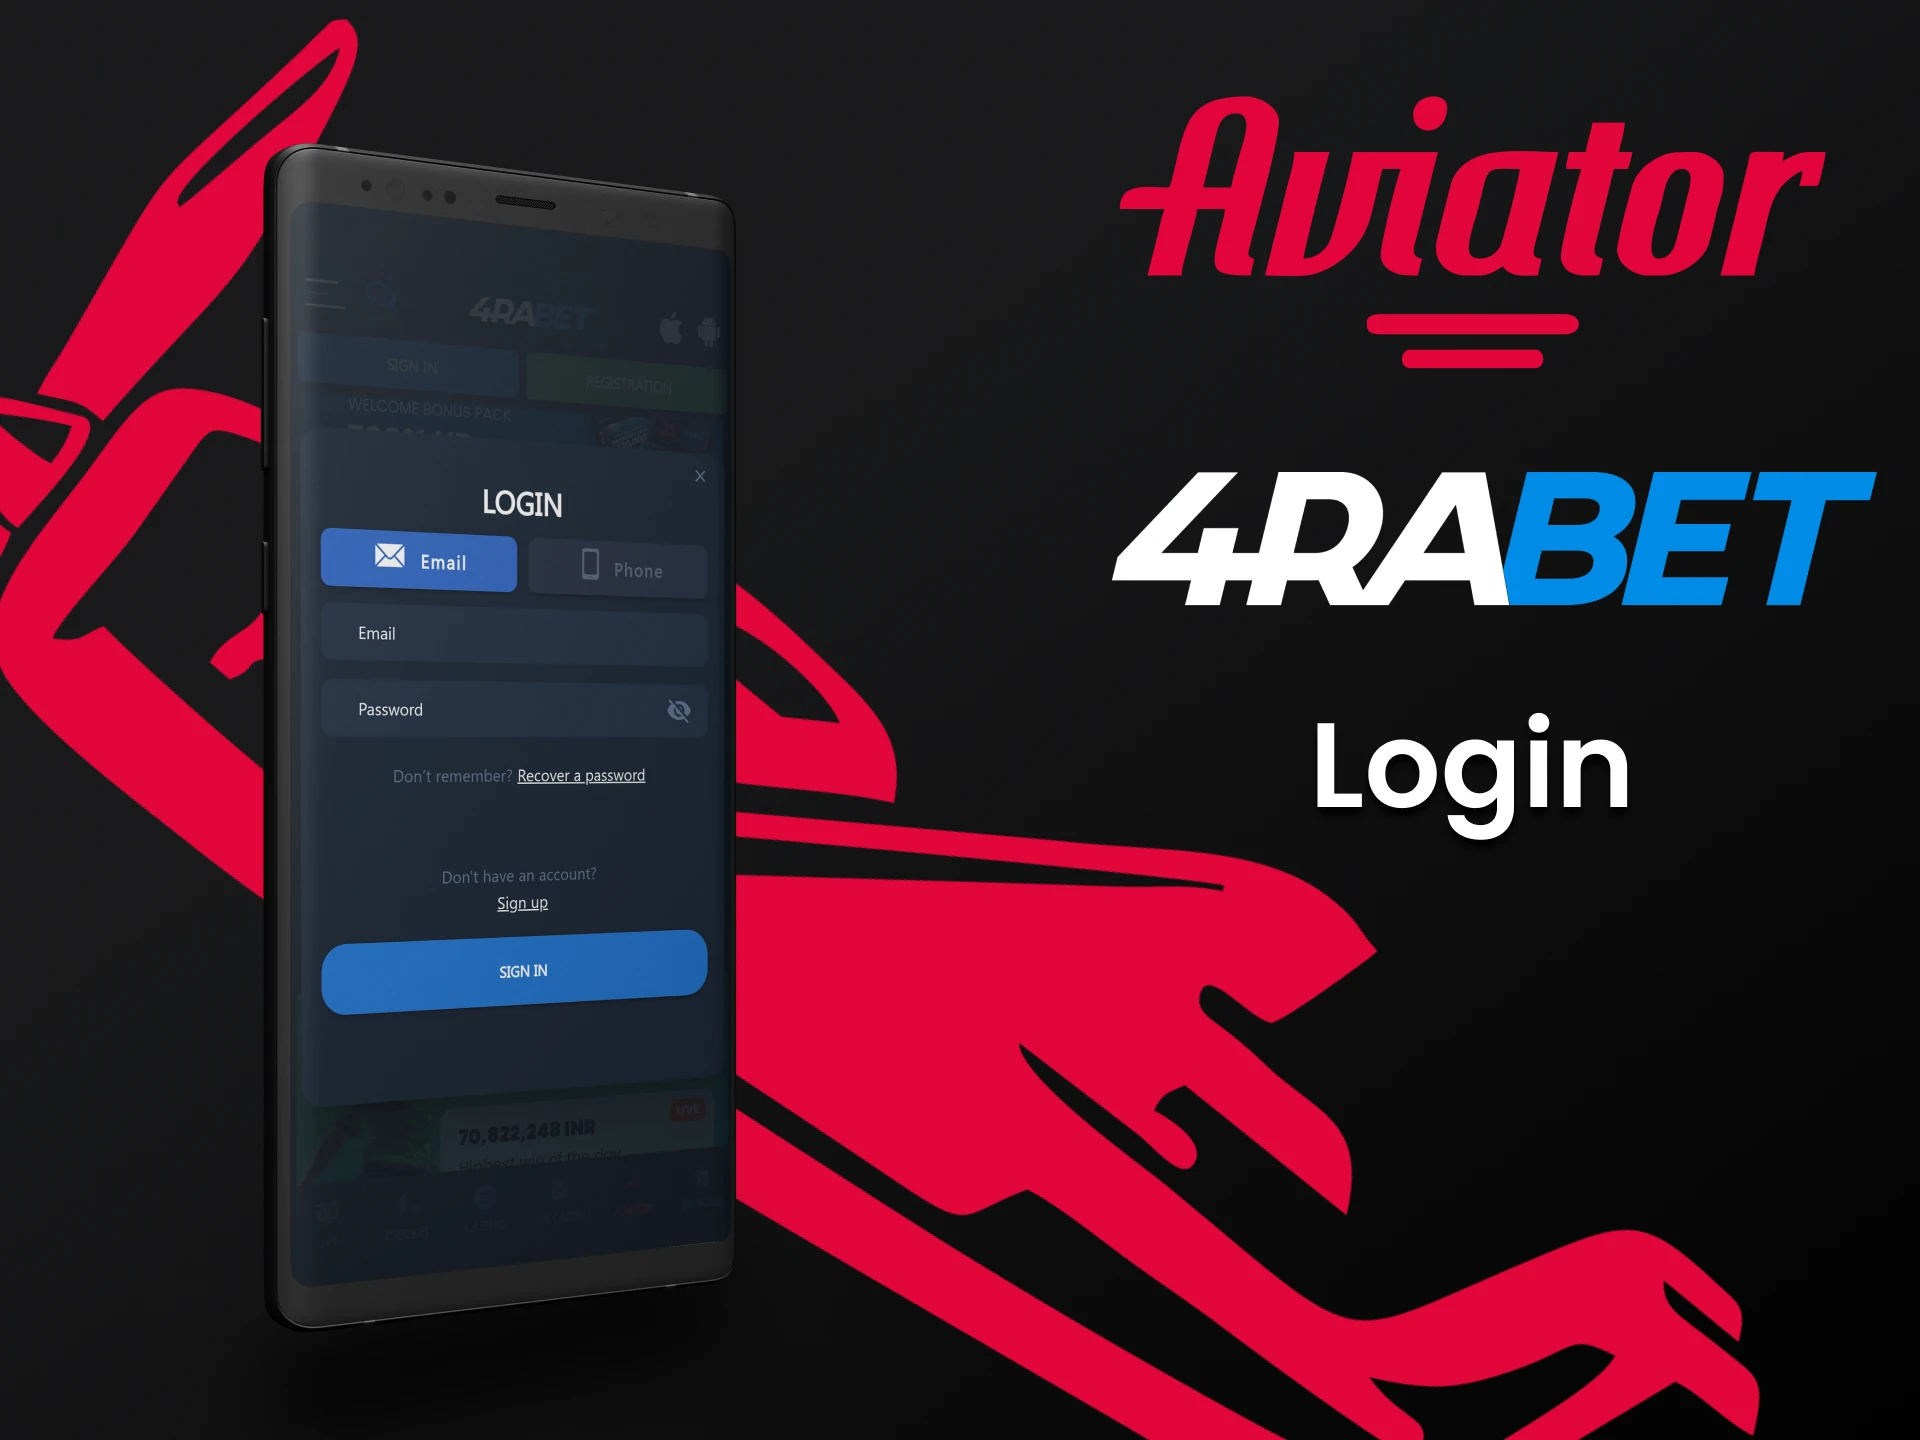 Use your 4rabet account to play Aviator.